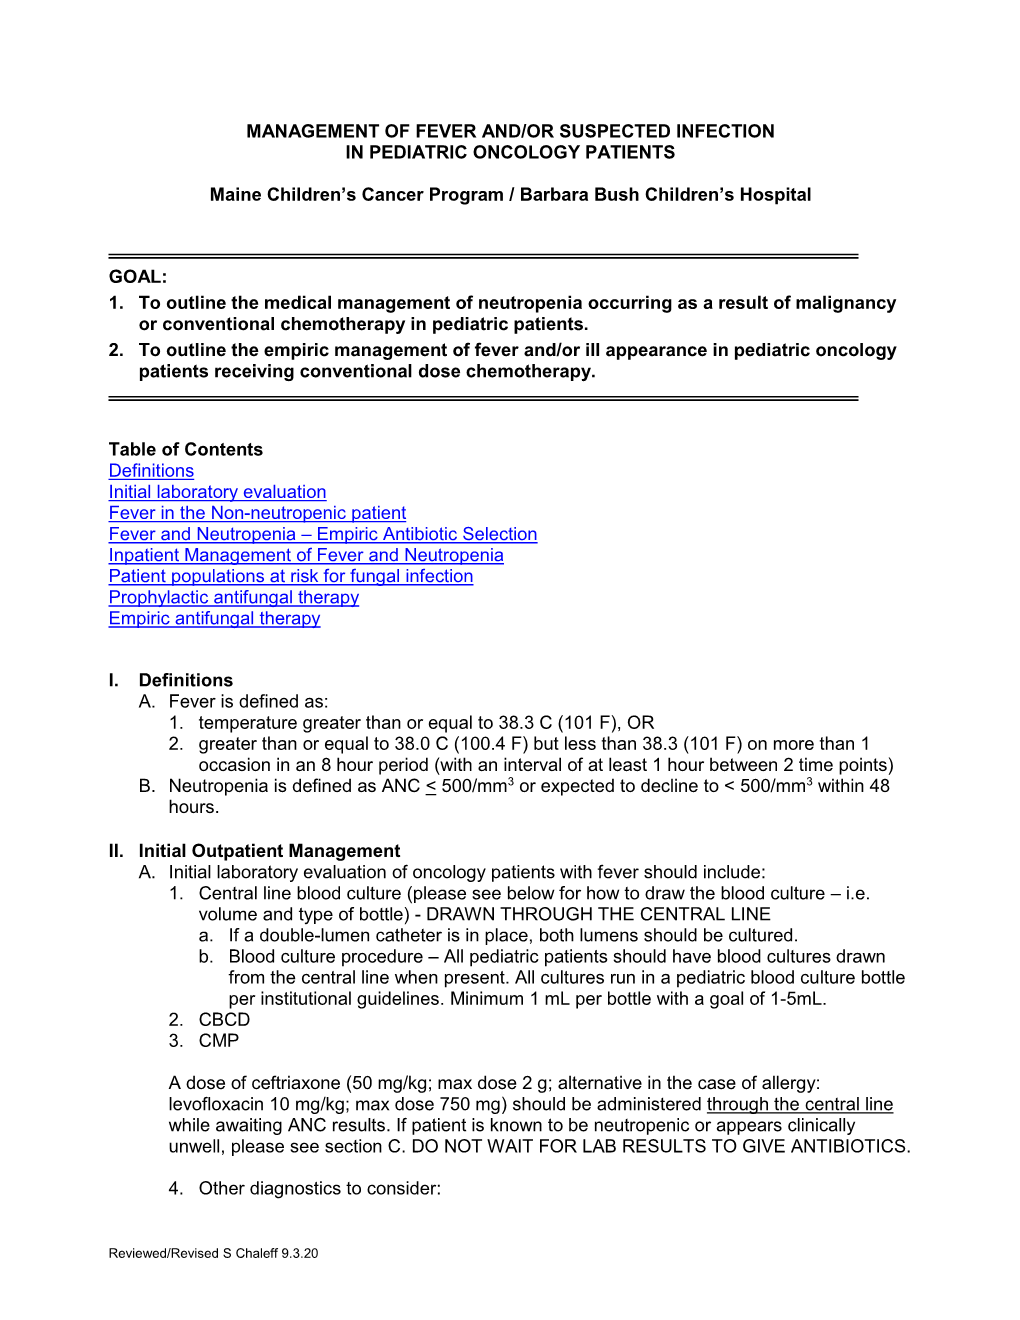 Management of Fever And/Or Suspected Infection in Pediatric Oncology Patients